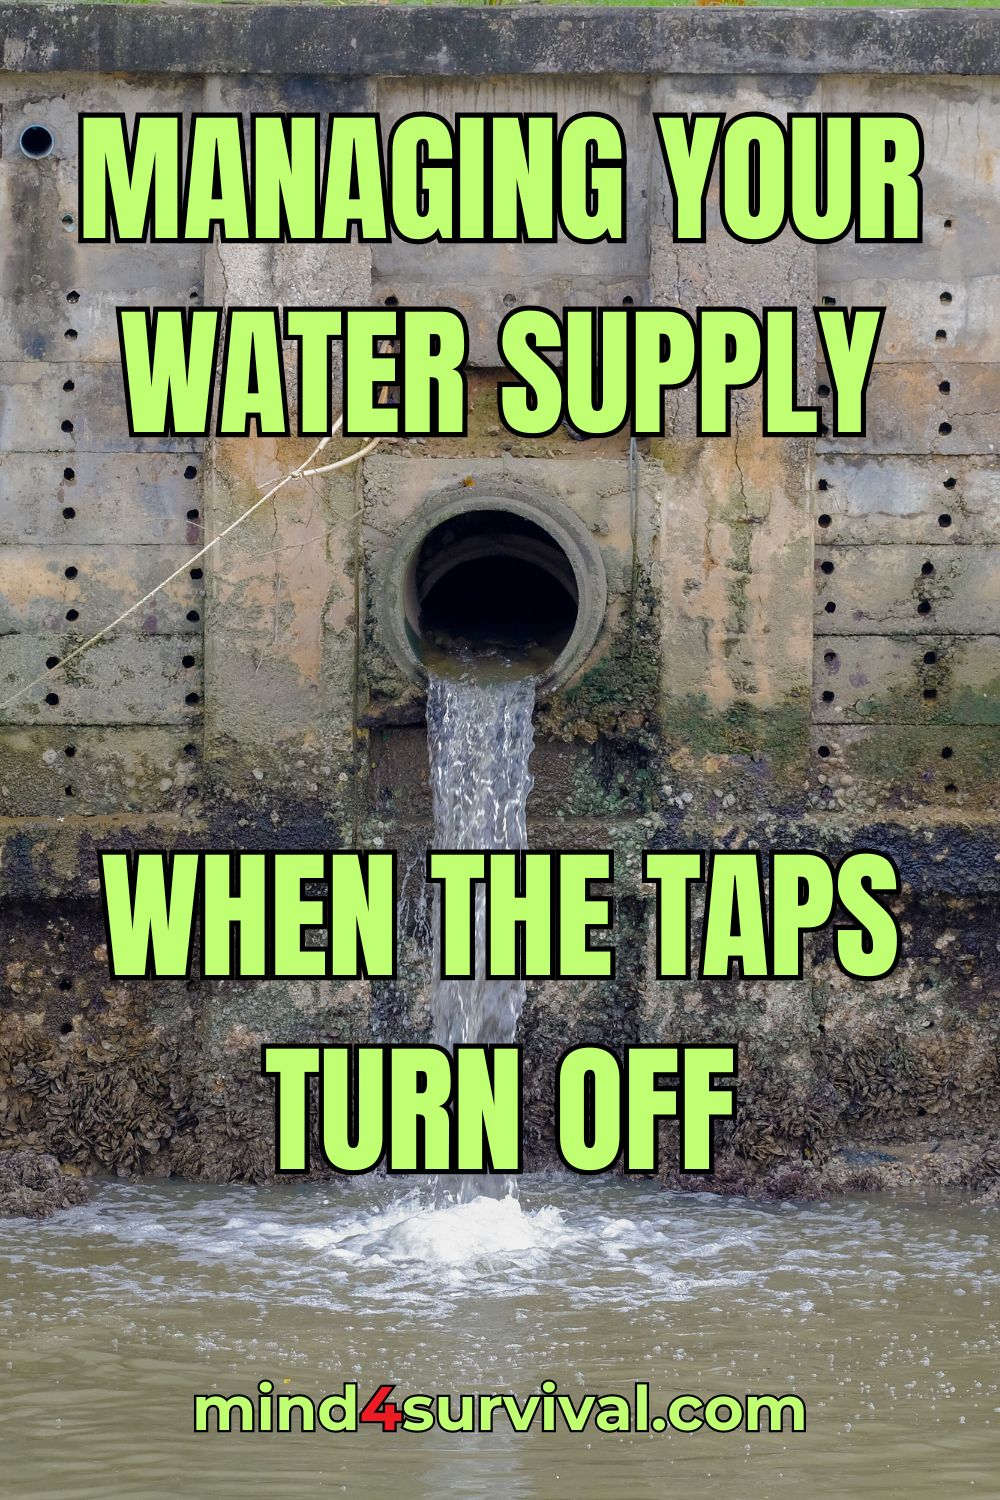 Managing Your Water Supply When the Taps Turn Off